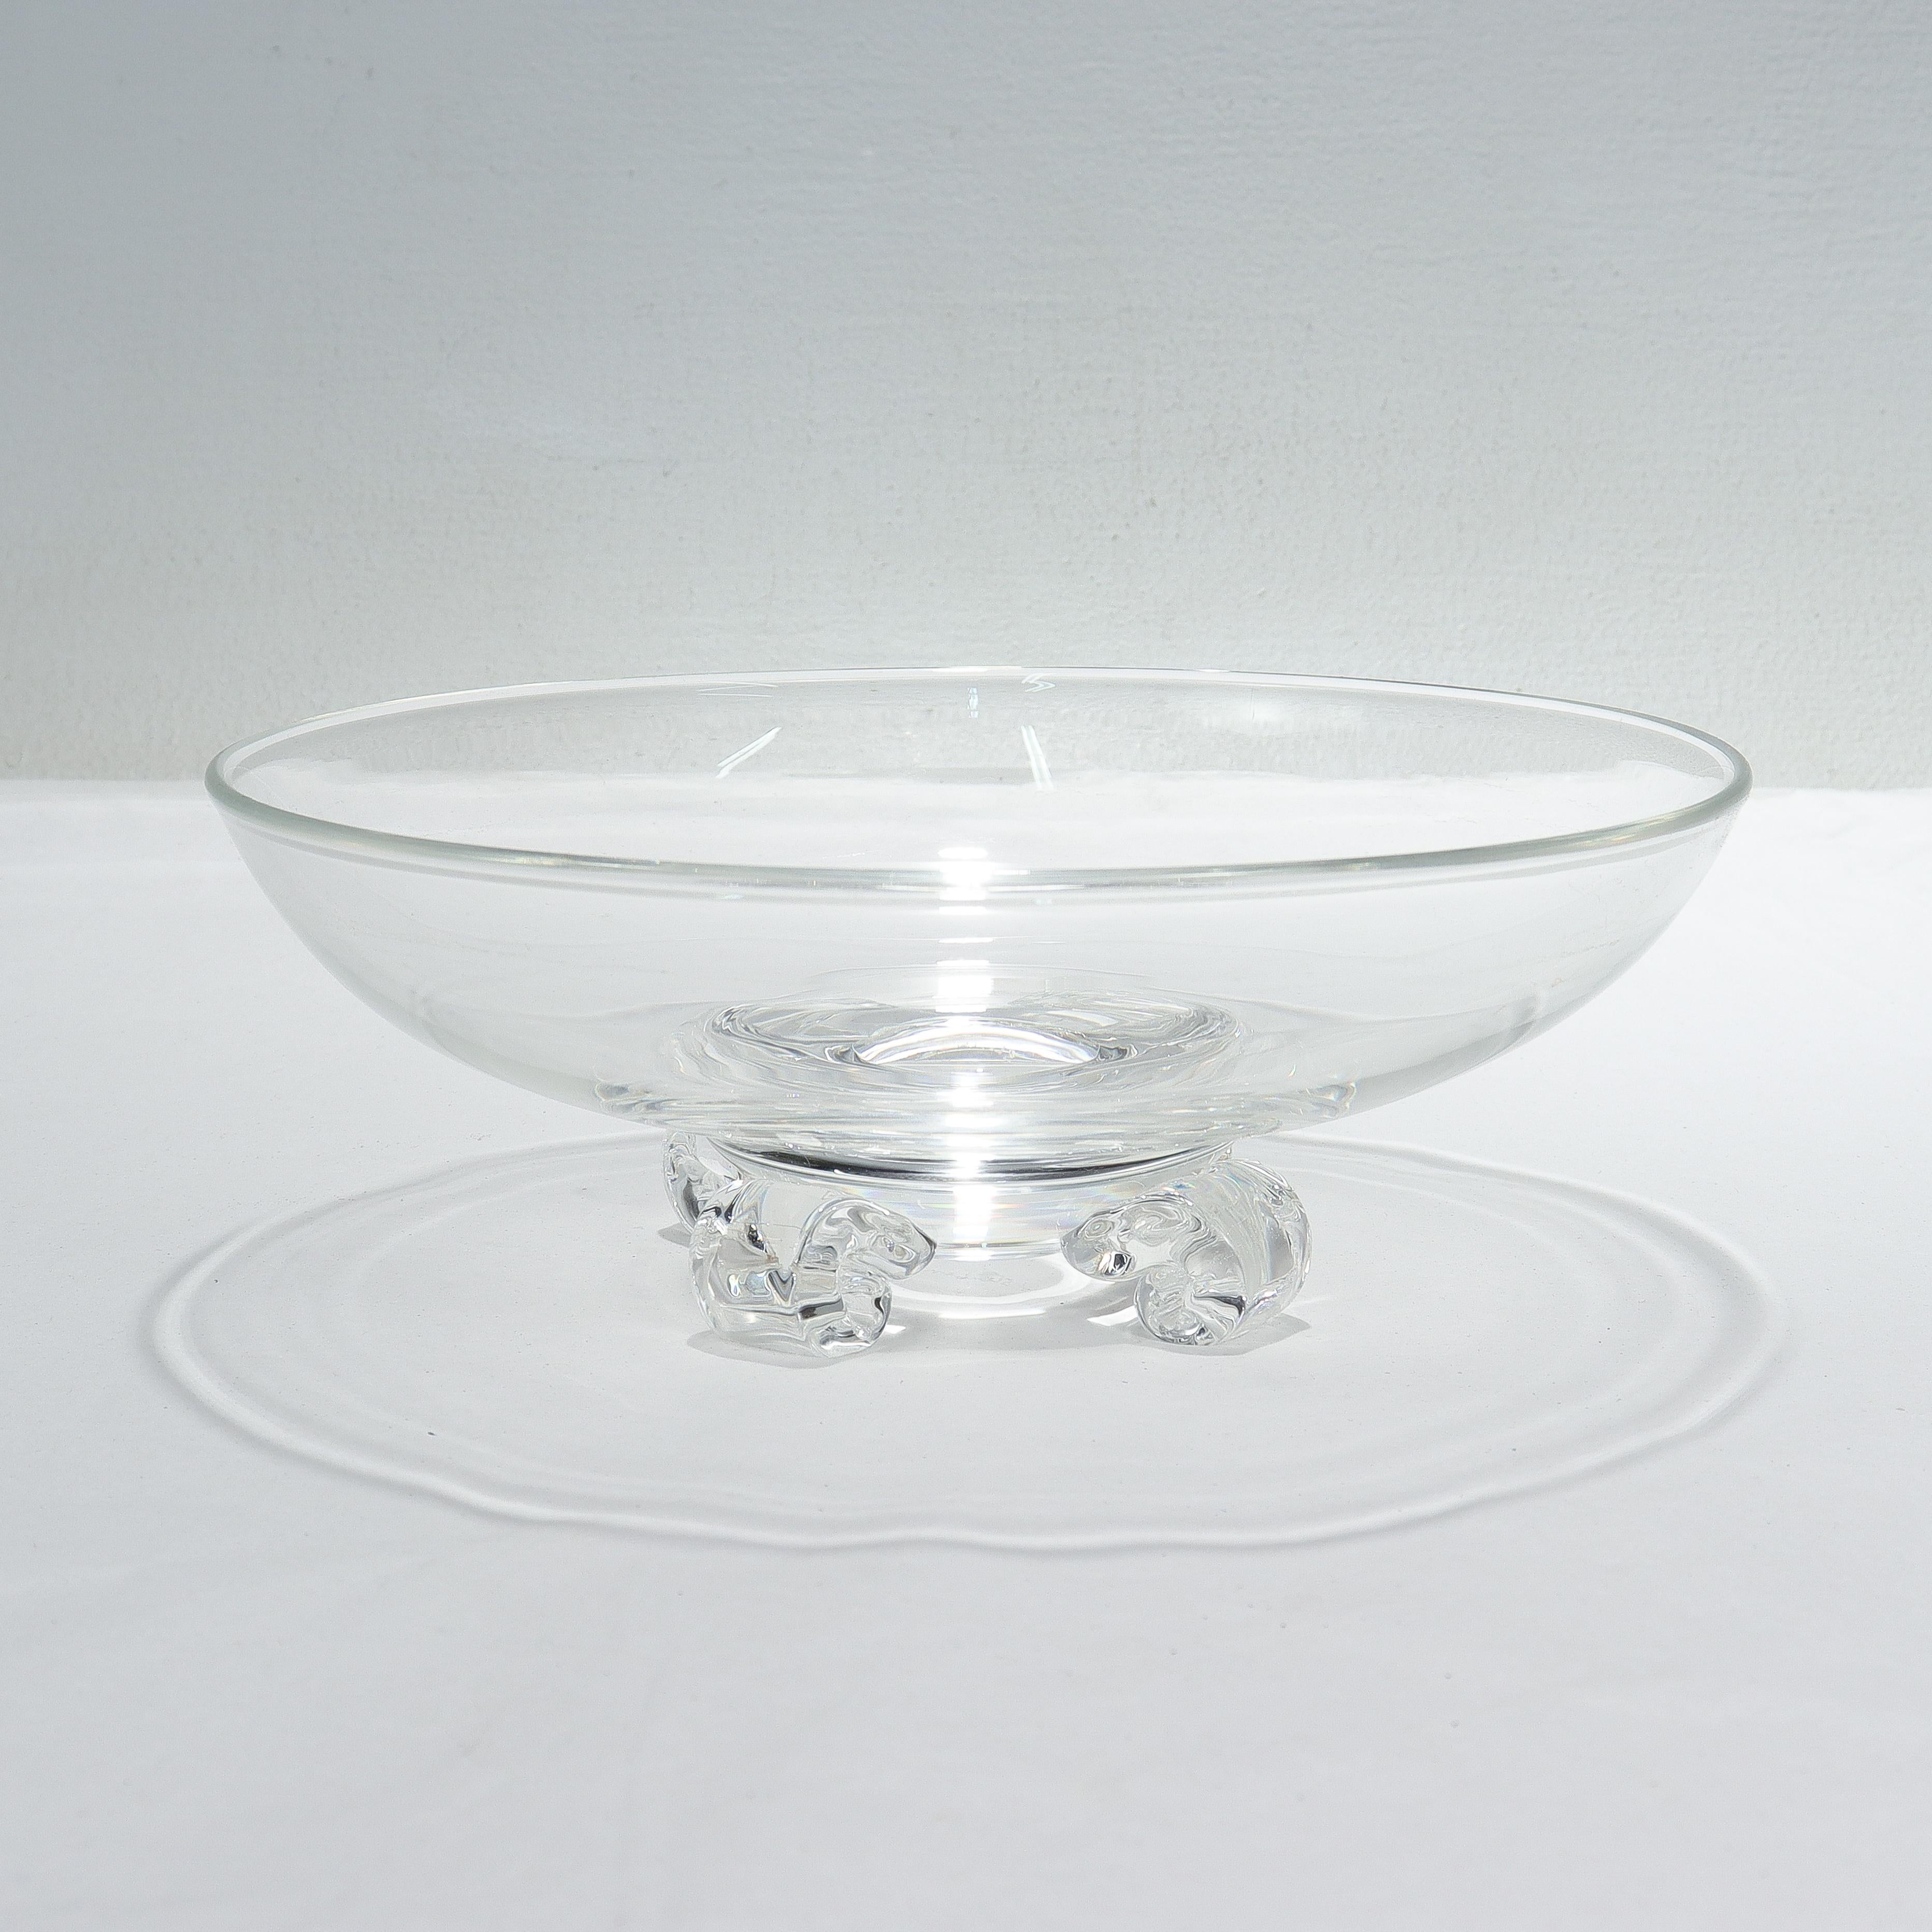 A fine midcentury footed art glass bowl.

By Steuben Glassworks.

Designed by John Dreves.

Model No. 7907

Supported by 4 scroll-shaped feet.

Simply a wonderful bowl from Steuben!

Date:
20th century

Overall Condition:
It is in